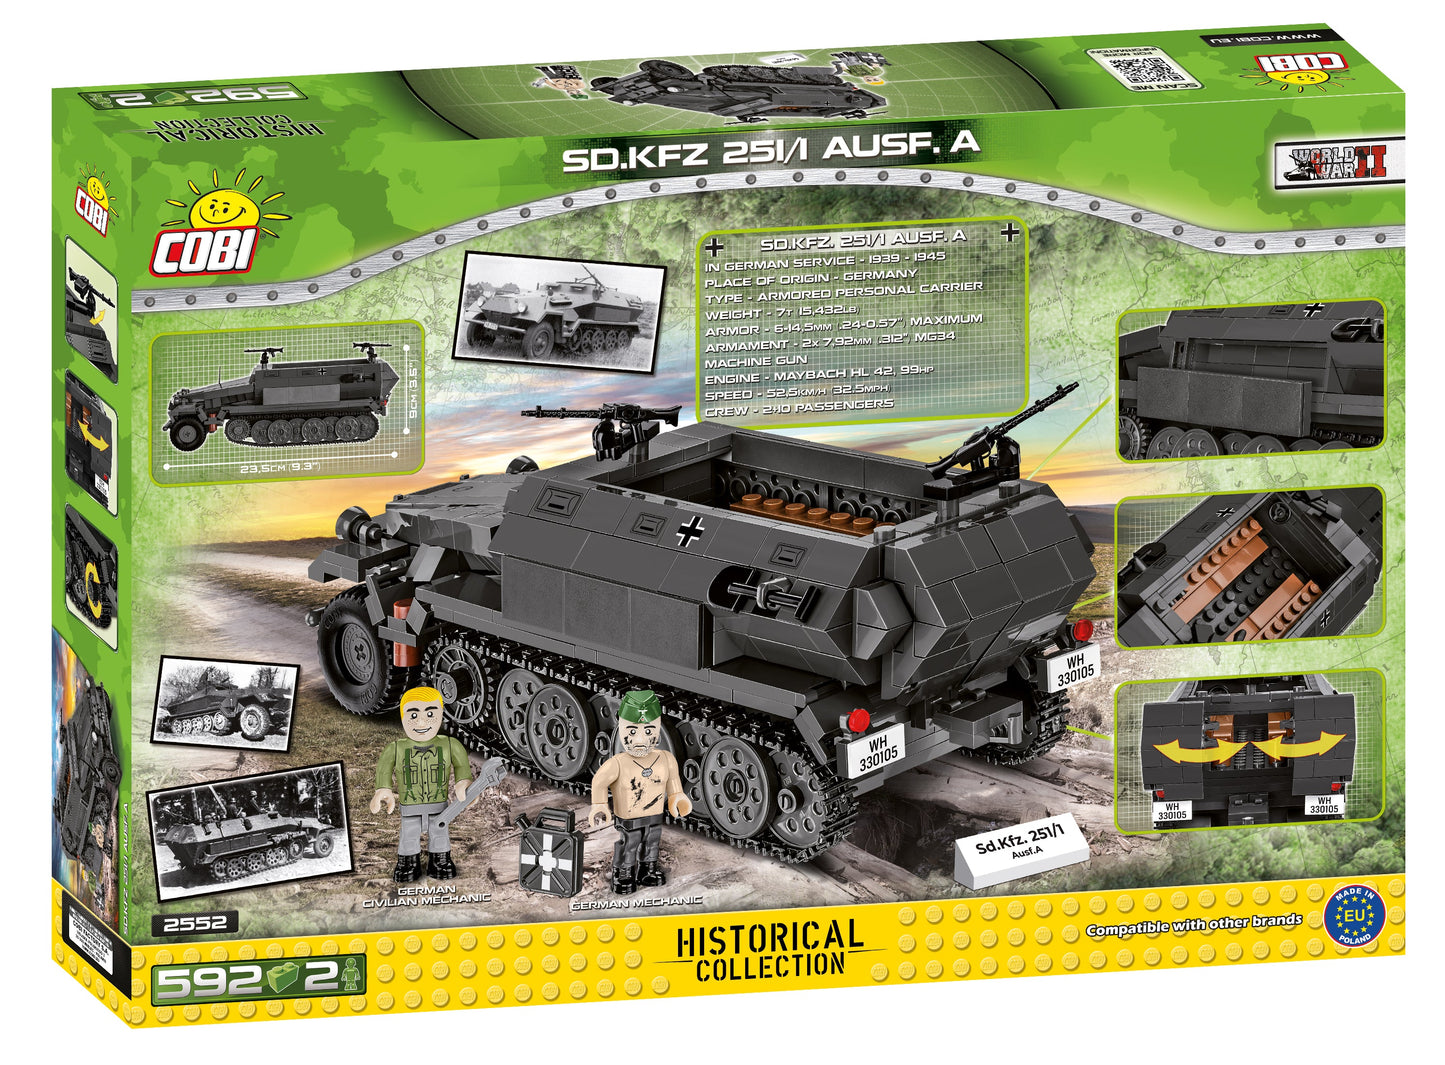 COBI Historical Collection Sd.Kfz.251/1 Ausf.A Vehicle